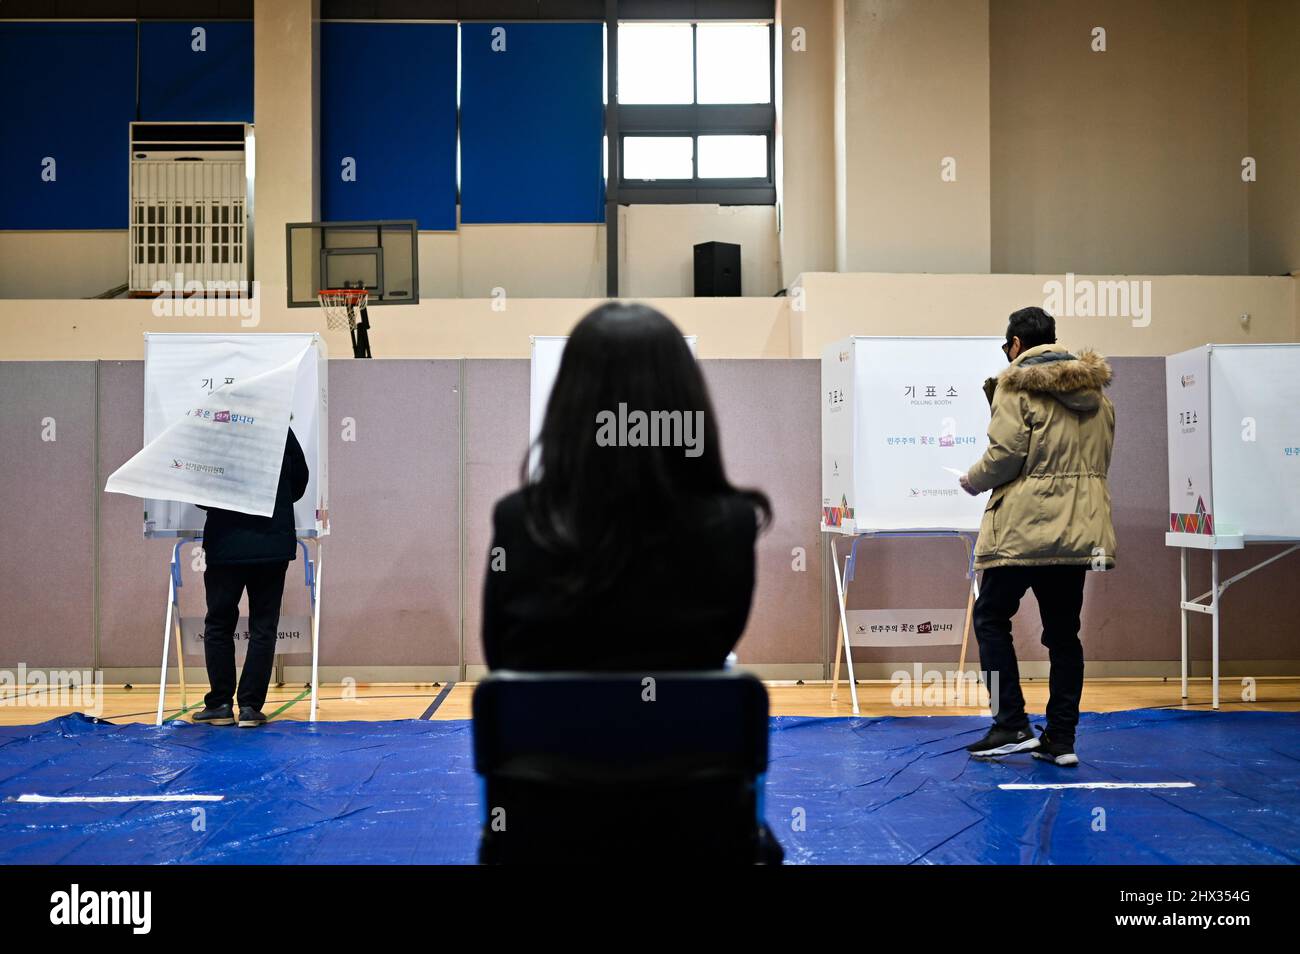 An election official monitors a polling station in the Mok-dong neighborhood of Seoul, South Korea during the presidential election on Wednesday, March 9, 2022. The two main candidates are Lee Jae-myung of the Democratic Party and Yoon Suk-yeol of the People Power Party. Photo by Thomas Maresca/UPI Stock Photo